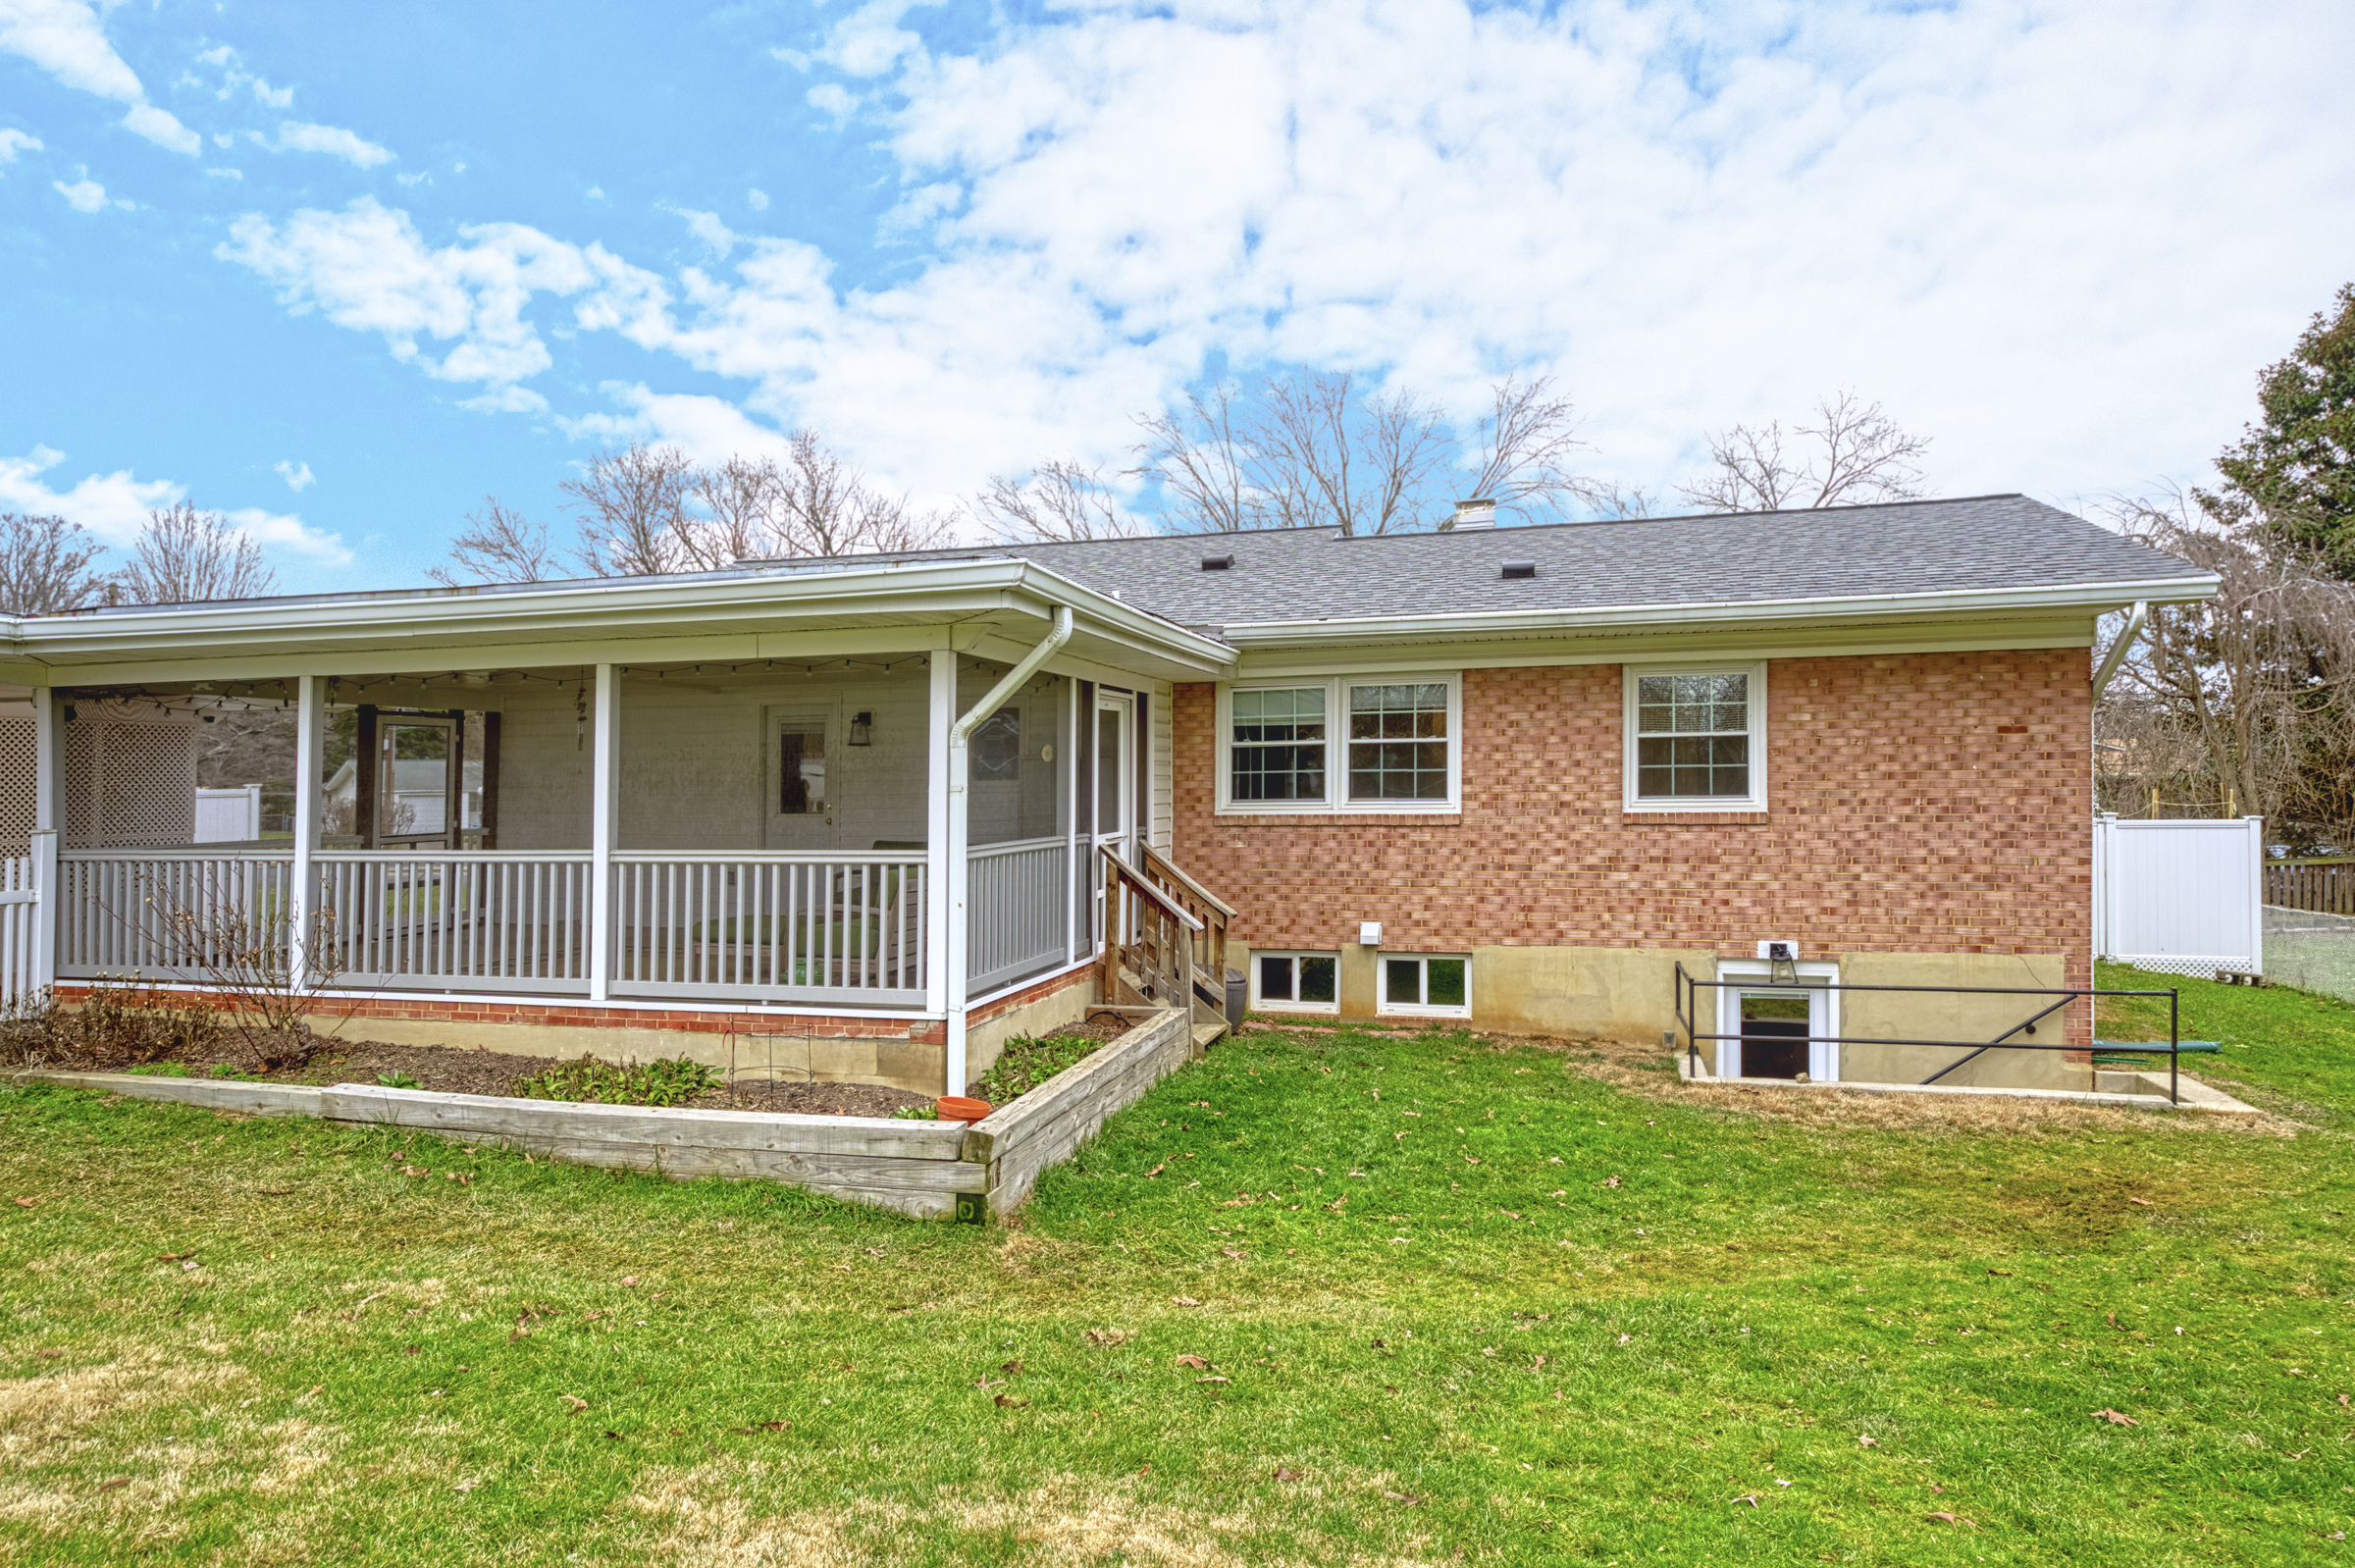 Professional exterior photo of 2624 Depaul Dr in Vienna, VA - showing the rear of a brick ranch home with screened porch and stairs down to lower level